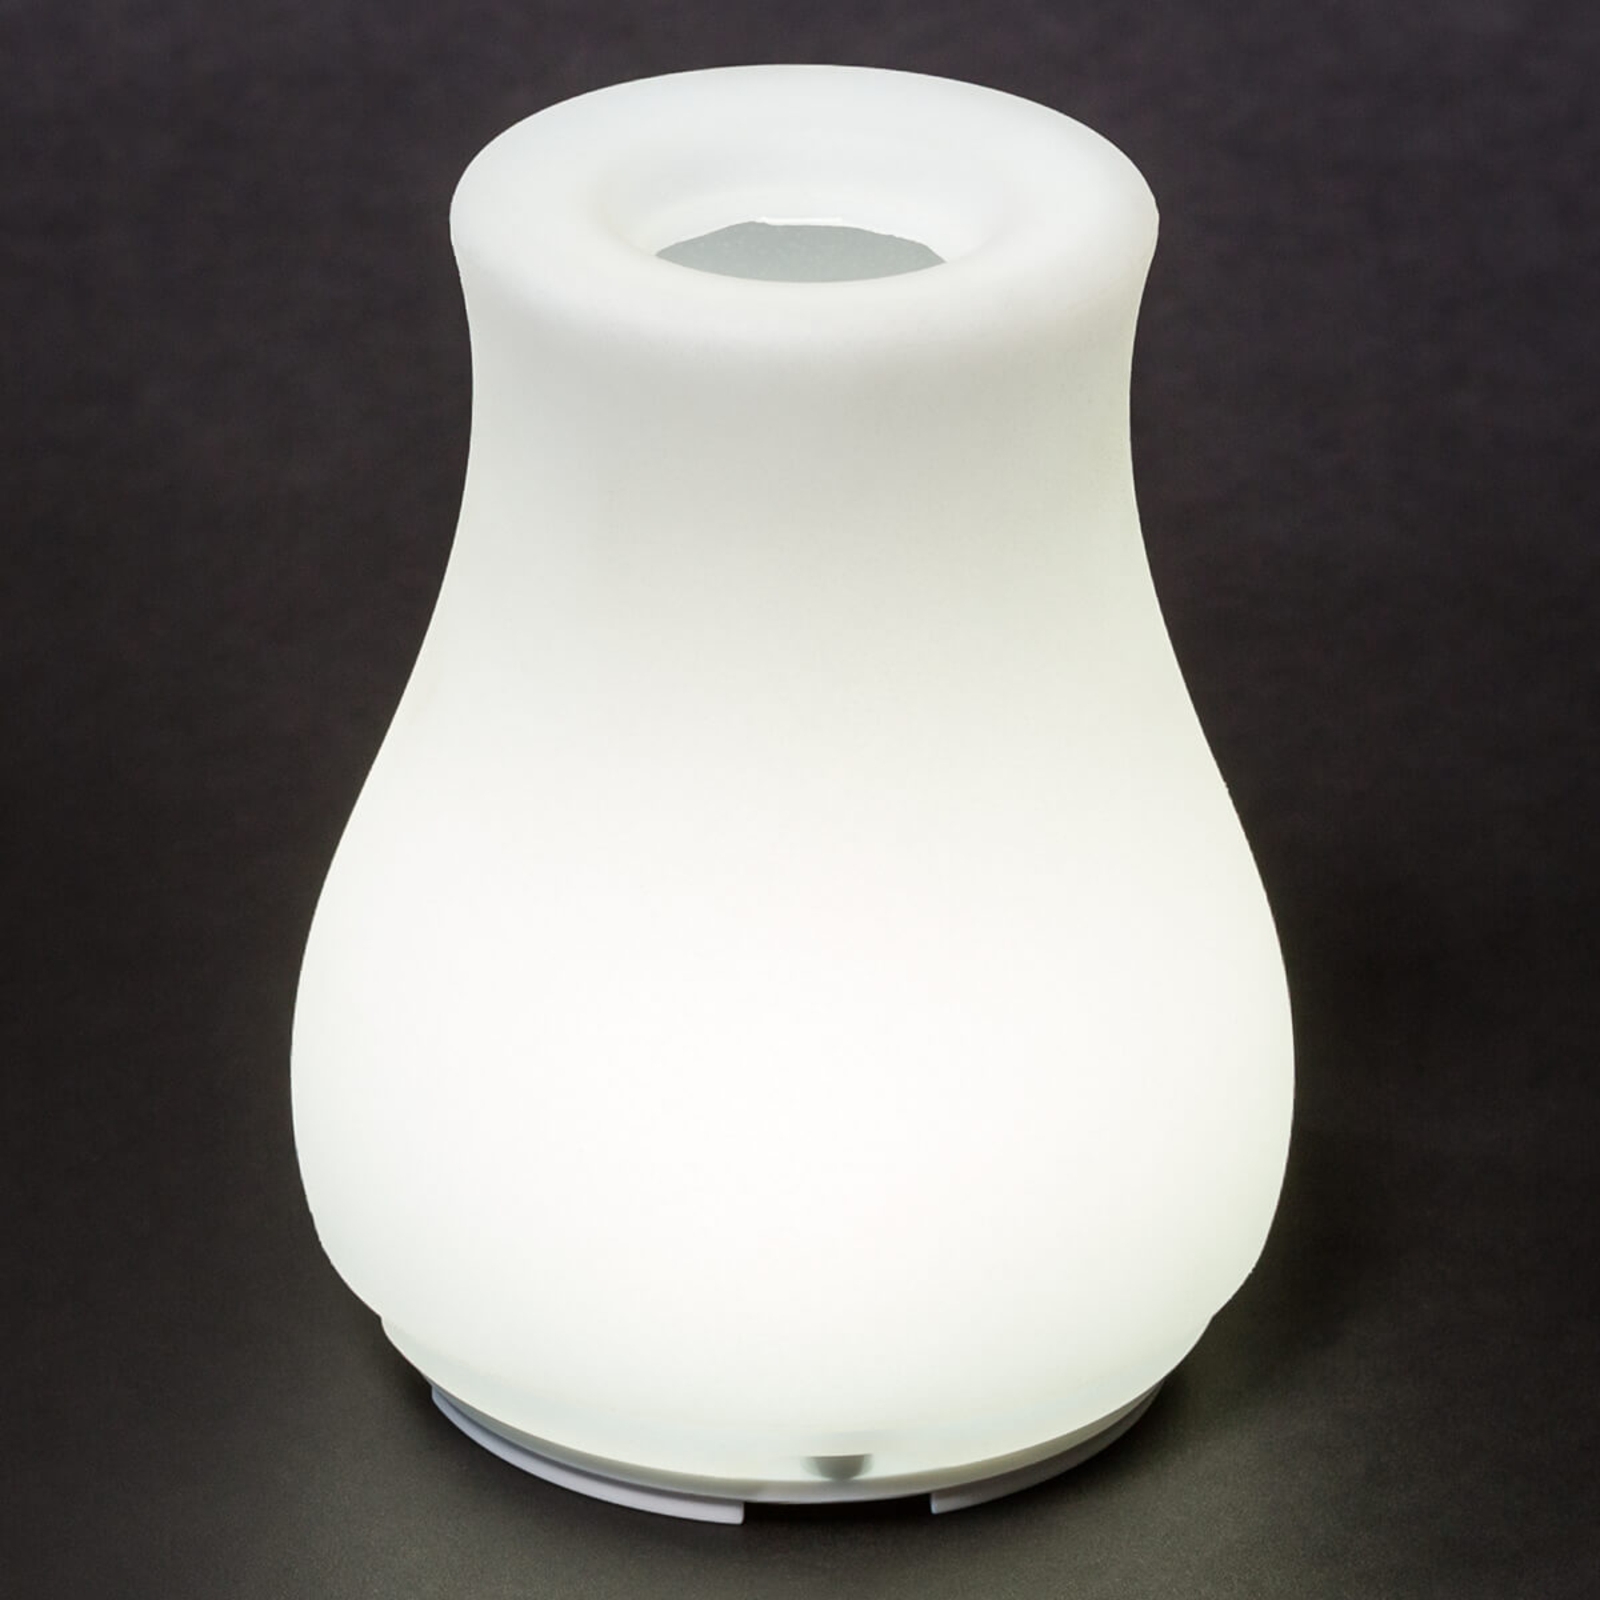 Olio - controllable LED light source and vase